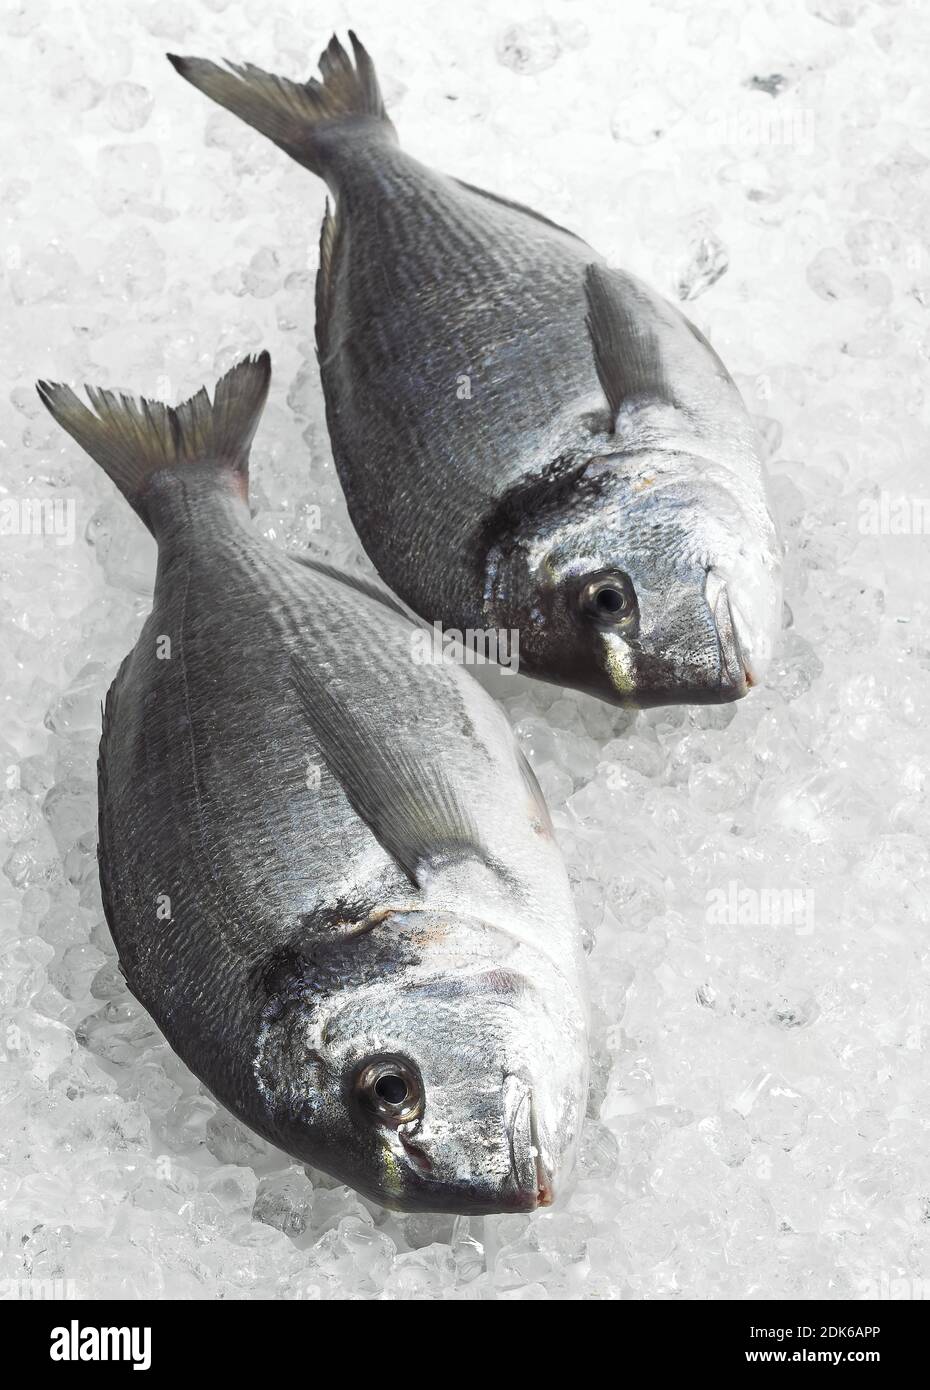 Gilthed Bream, sparus auratus, Fresh Fish on Ice Stock Photo